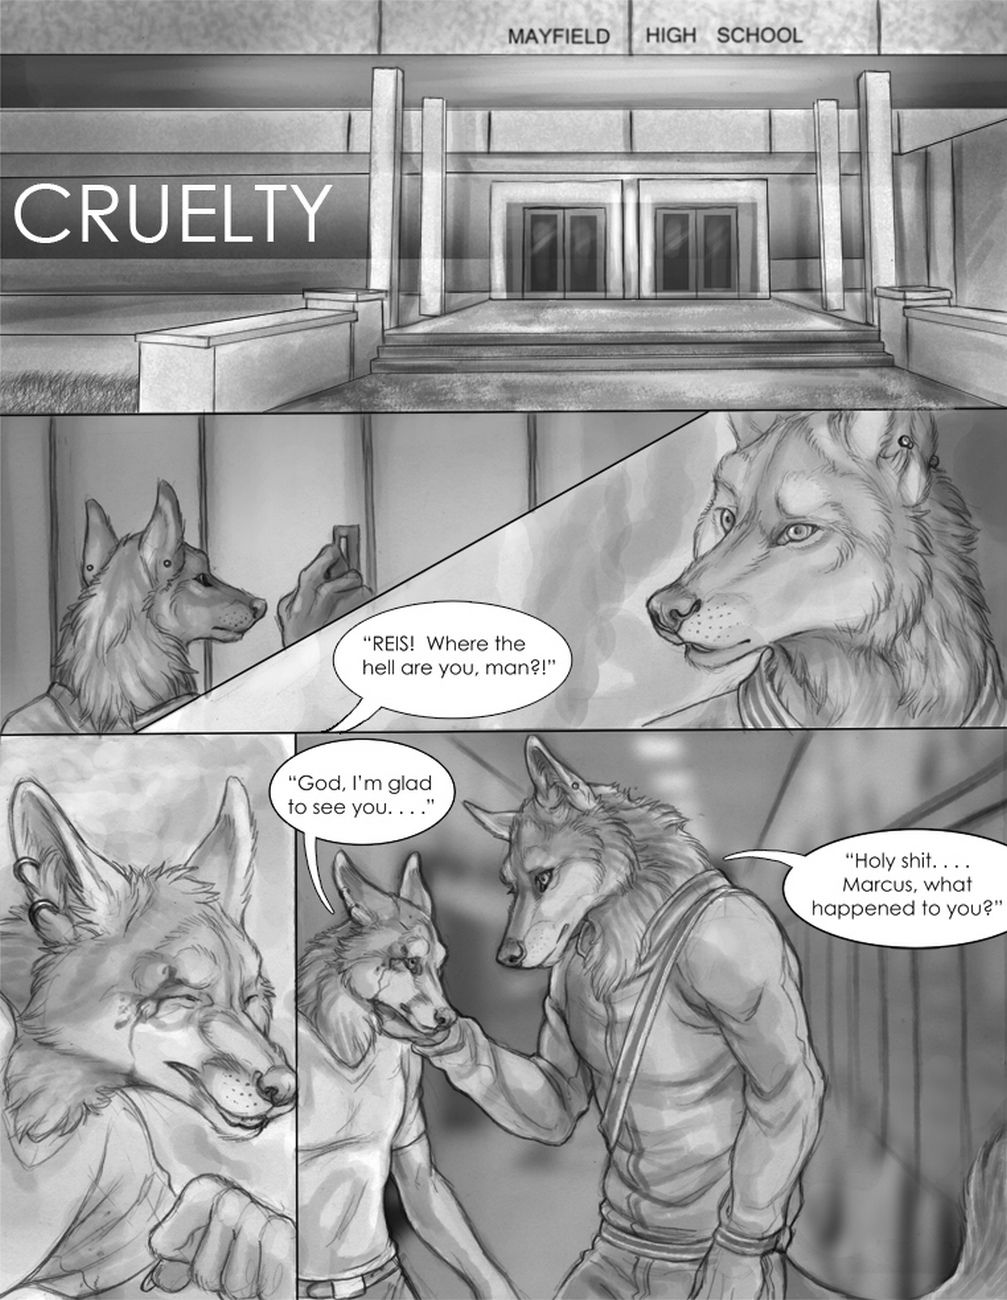 Cruelty page 2